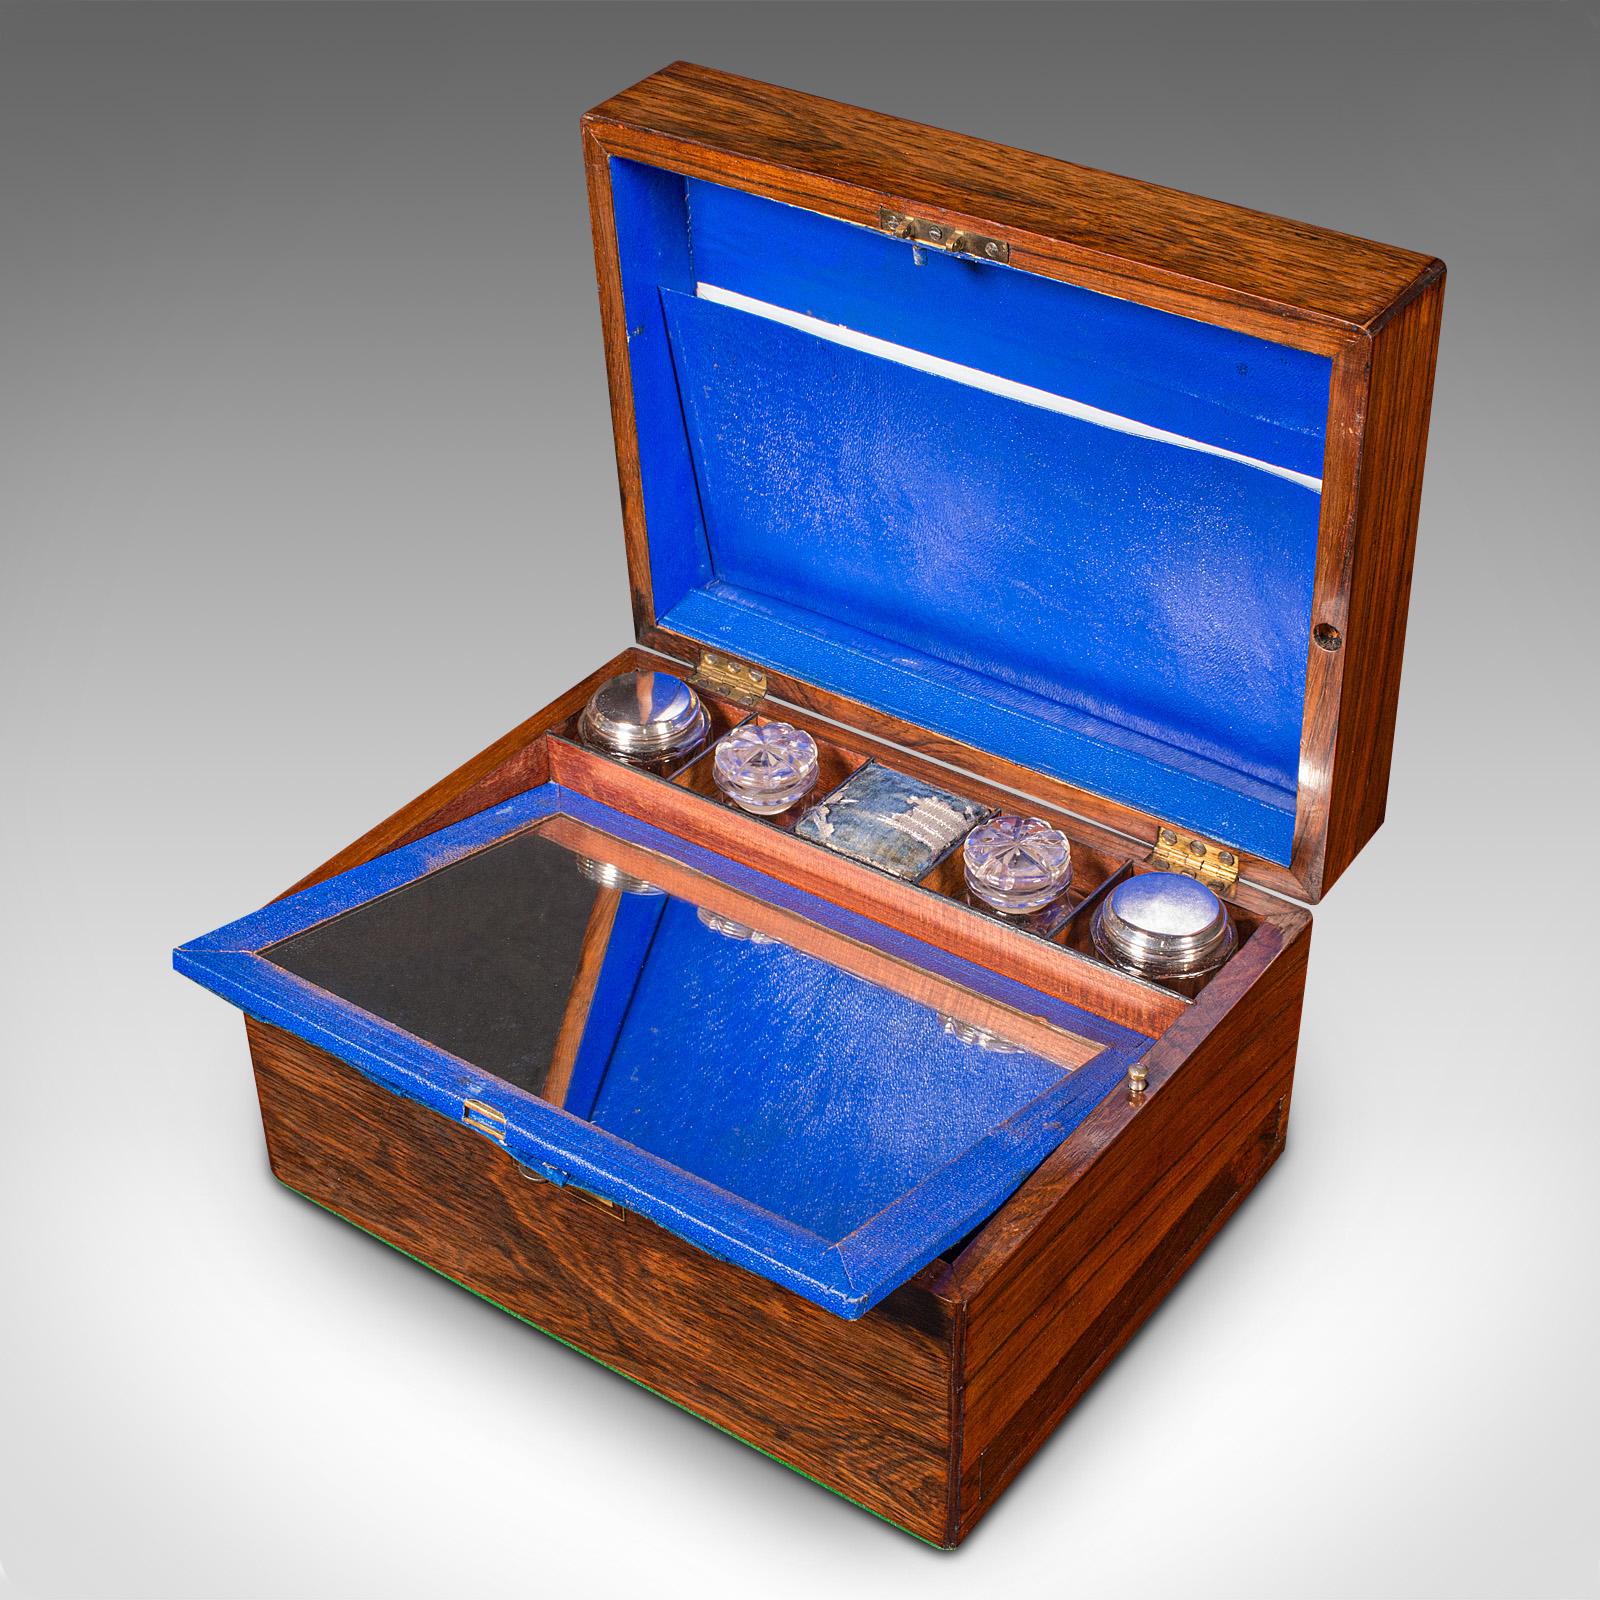 Antique Vanity Case, English, Travelling Dressing Table Box, Regency, Circa 1820 For Sale 4